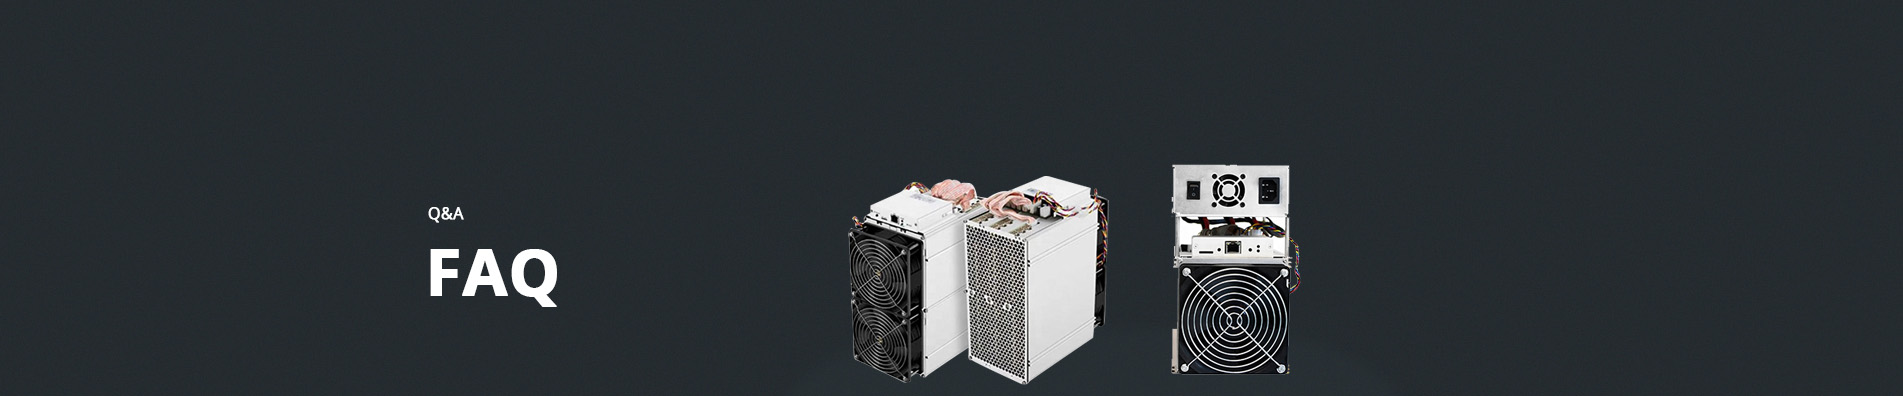 AvalonMiner 1246 Second hand